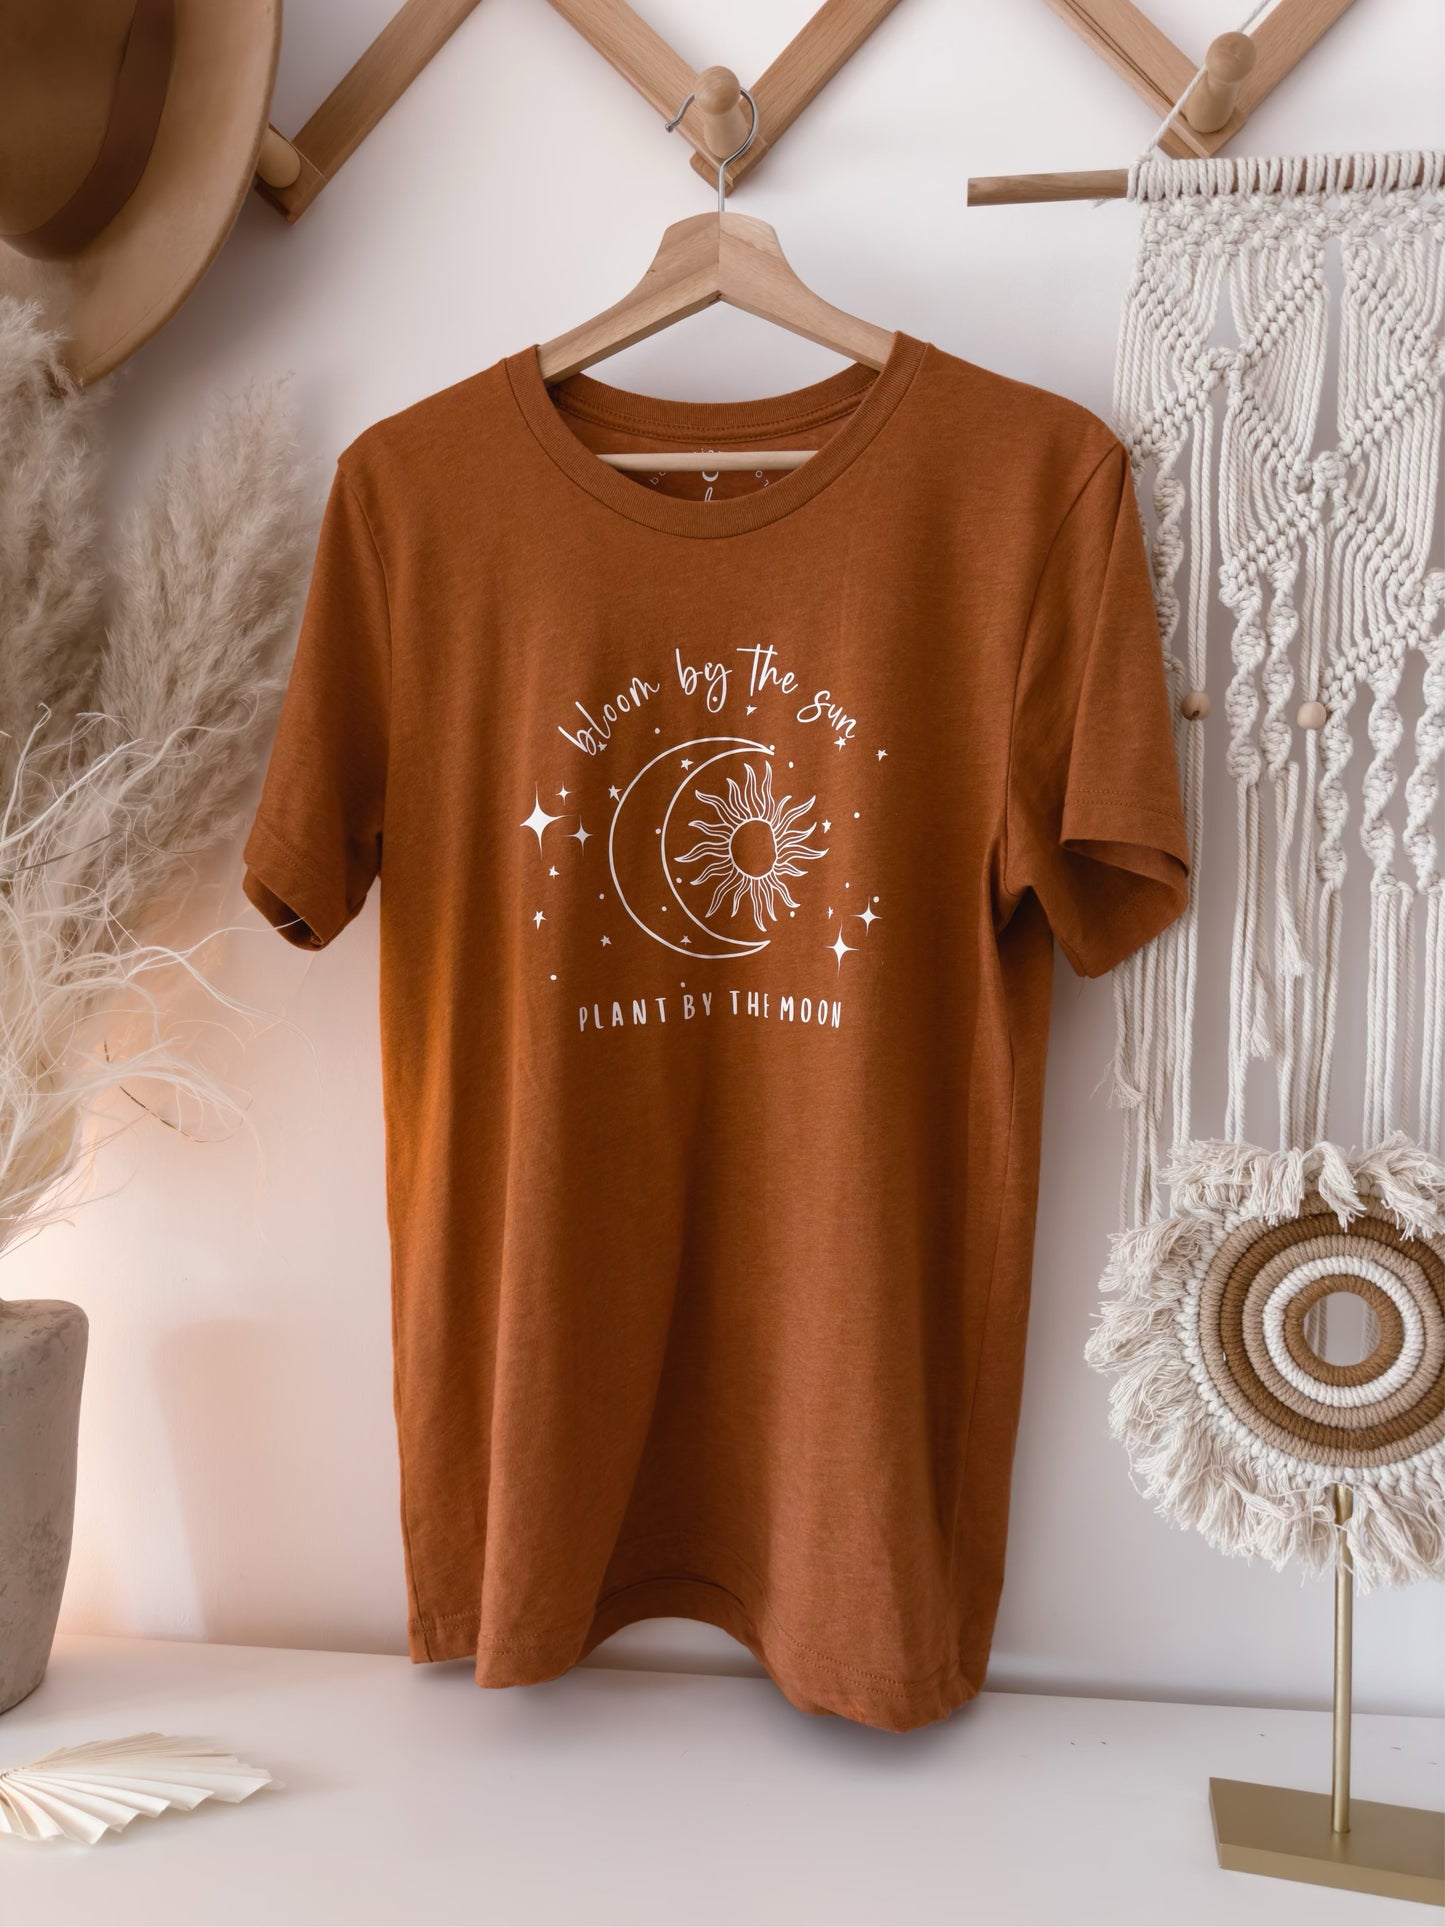 Plant by the Moon | t-shirt